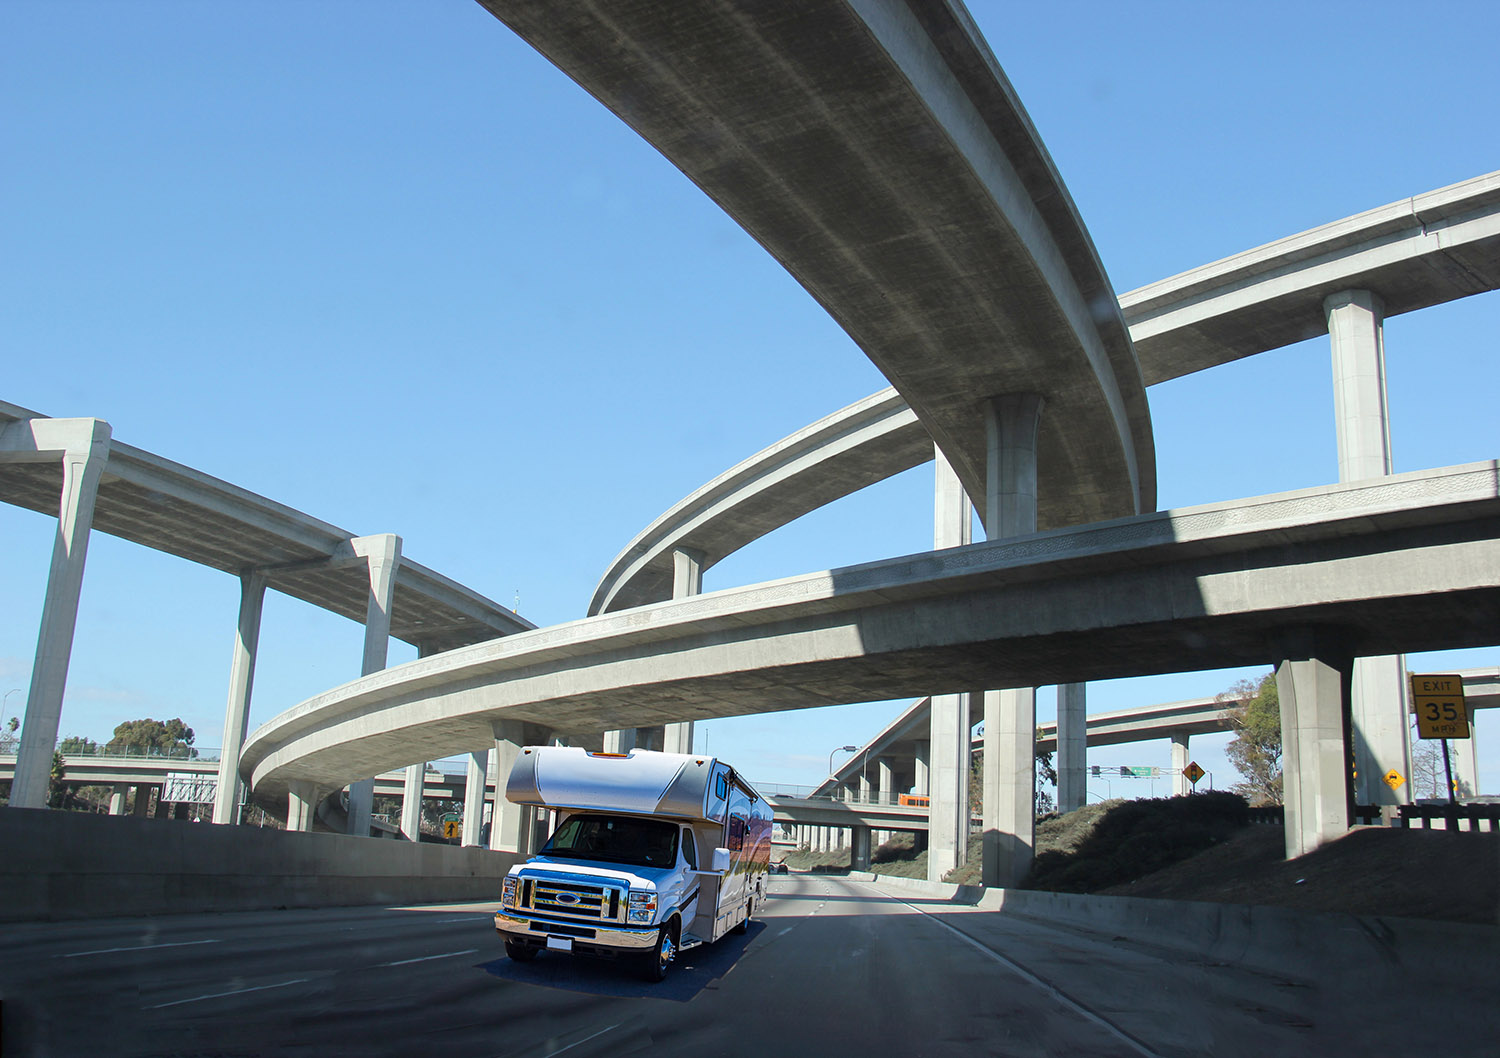 RV driving under several overpasses on a clear interstate.